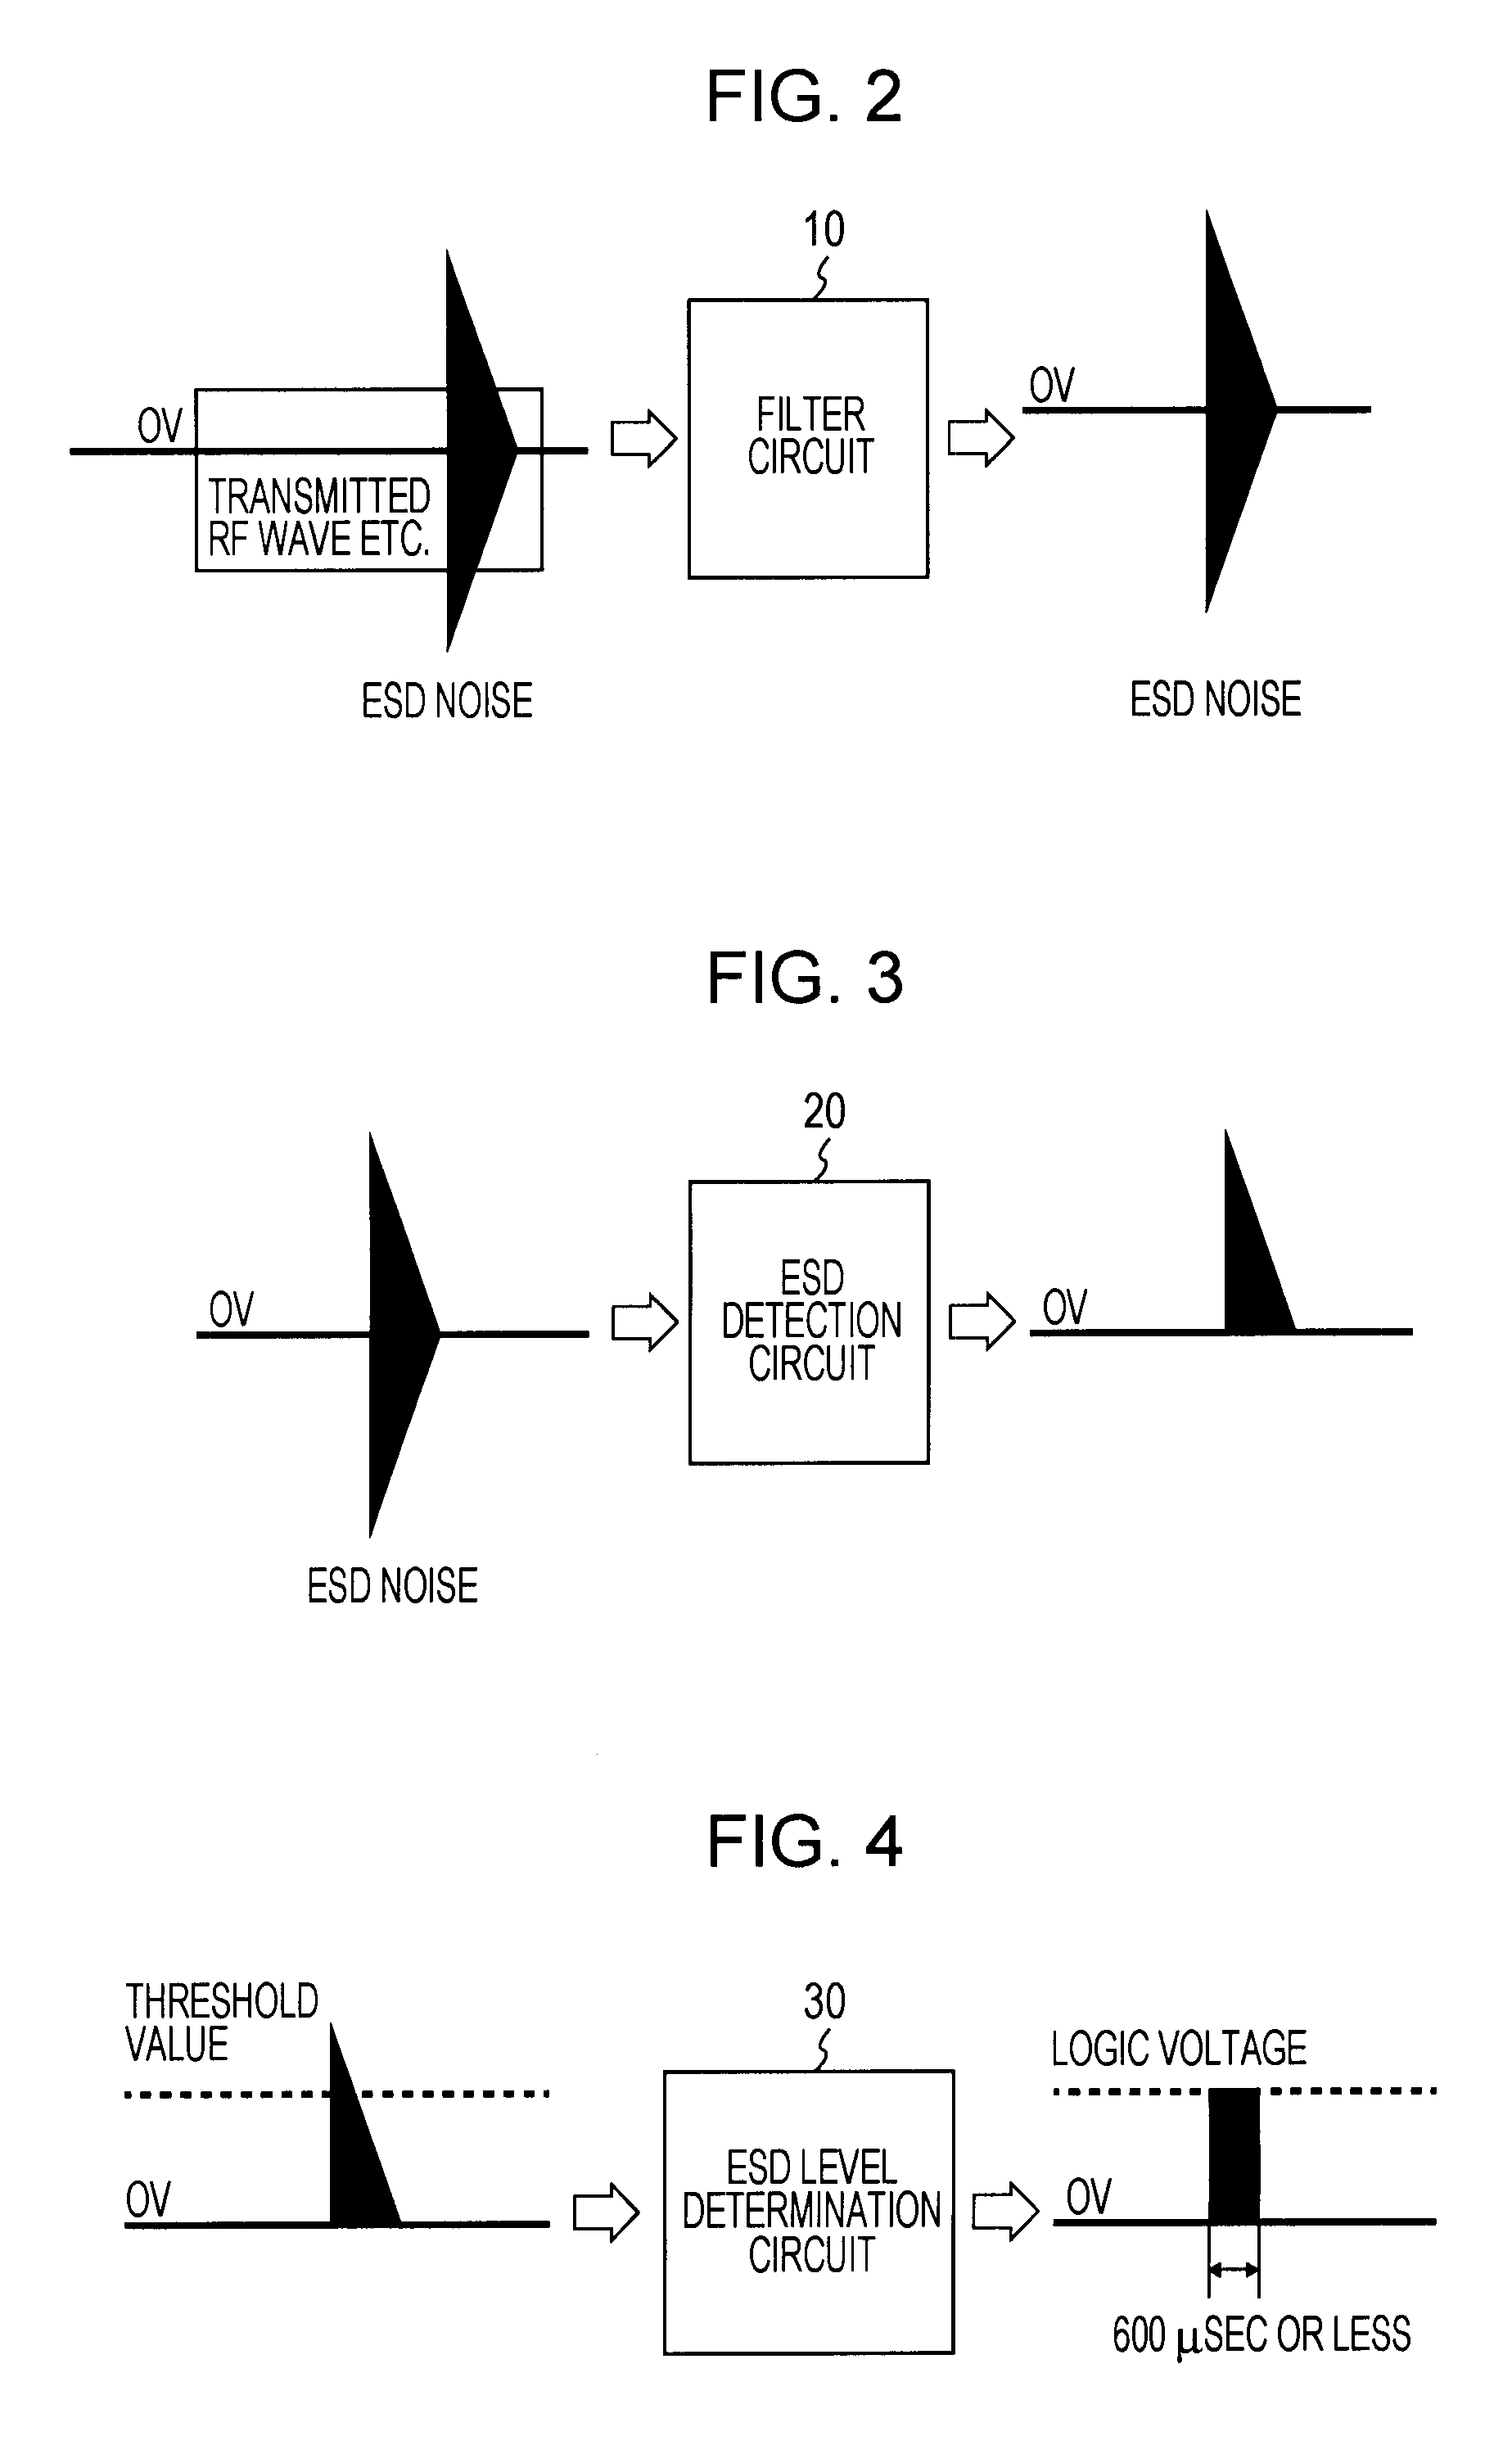 Electrostatic discharge (ESD) protection device